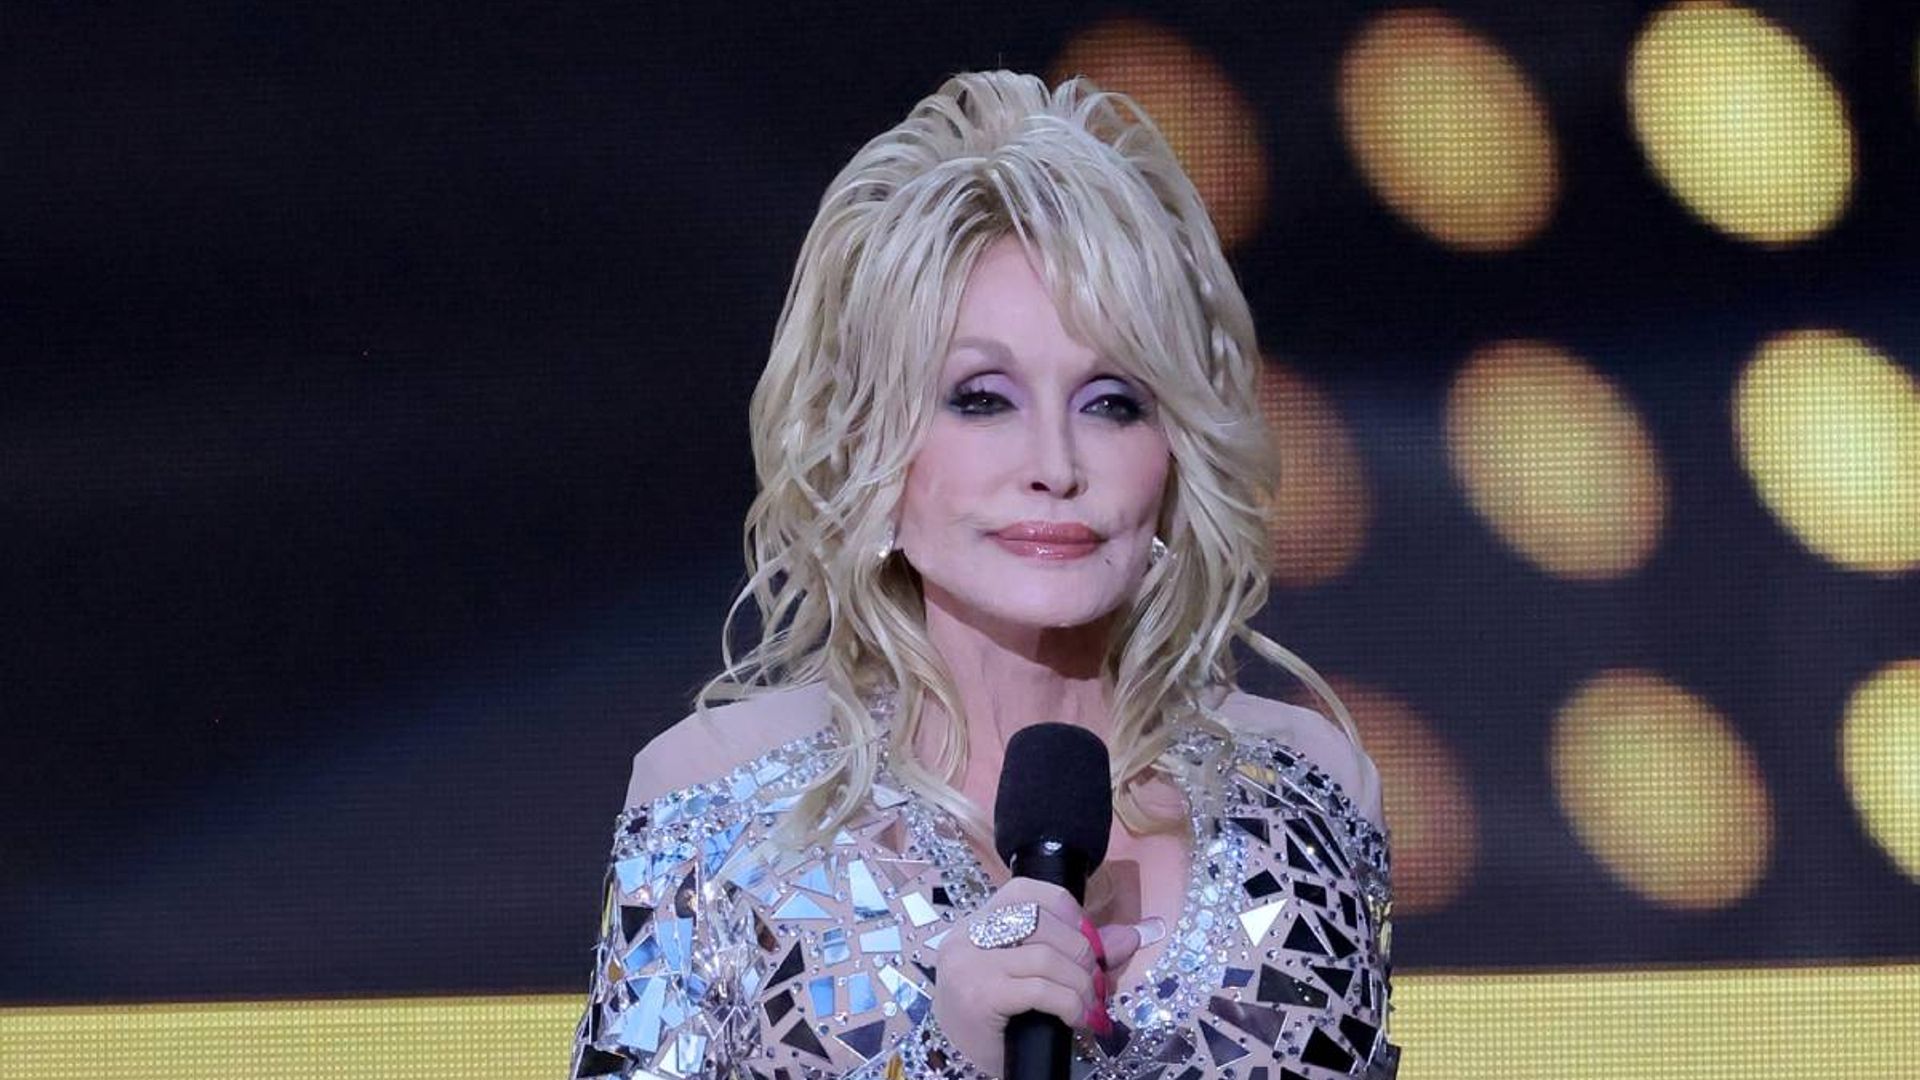 Dolly Parton shares heartwarming message after receiving award she initially rejected